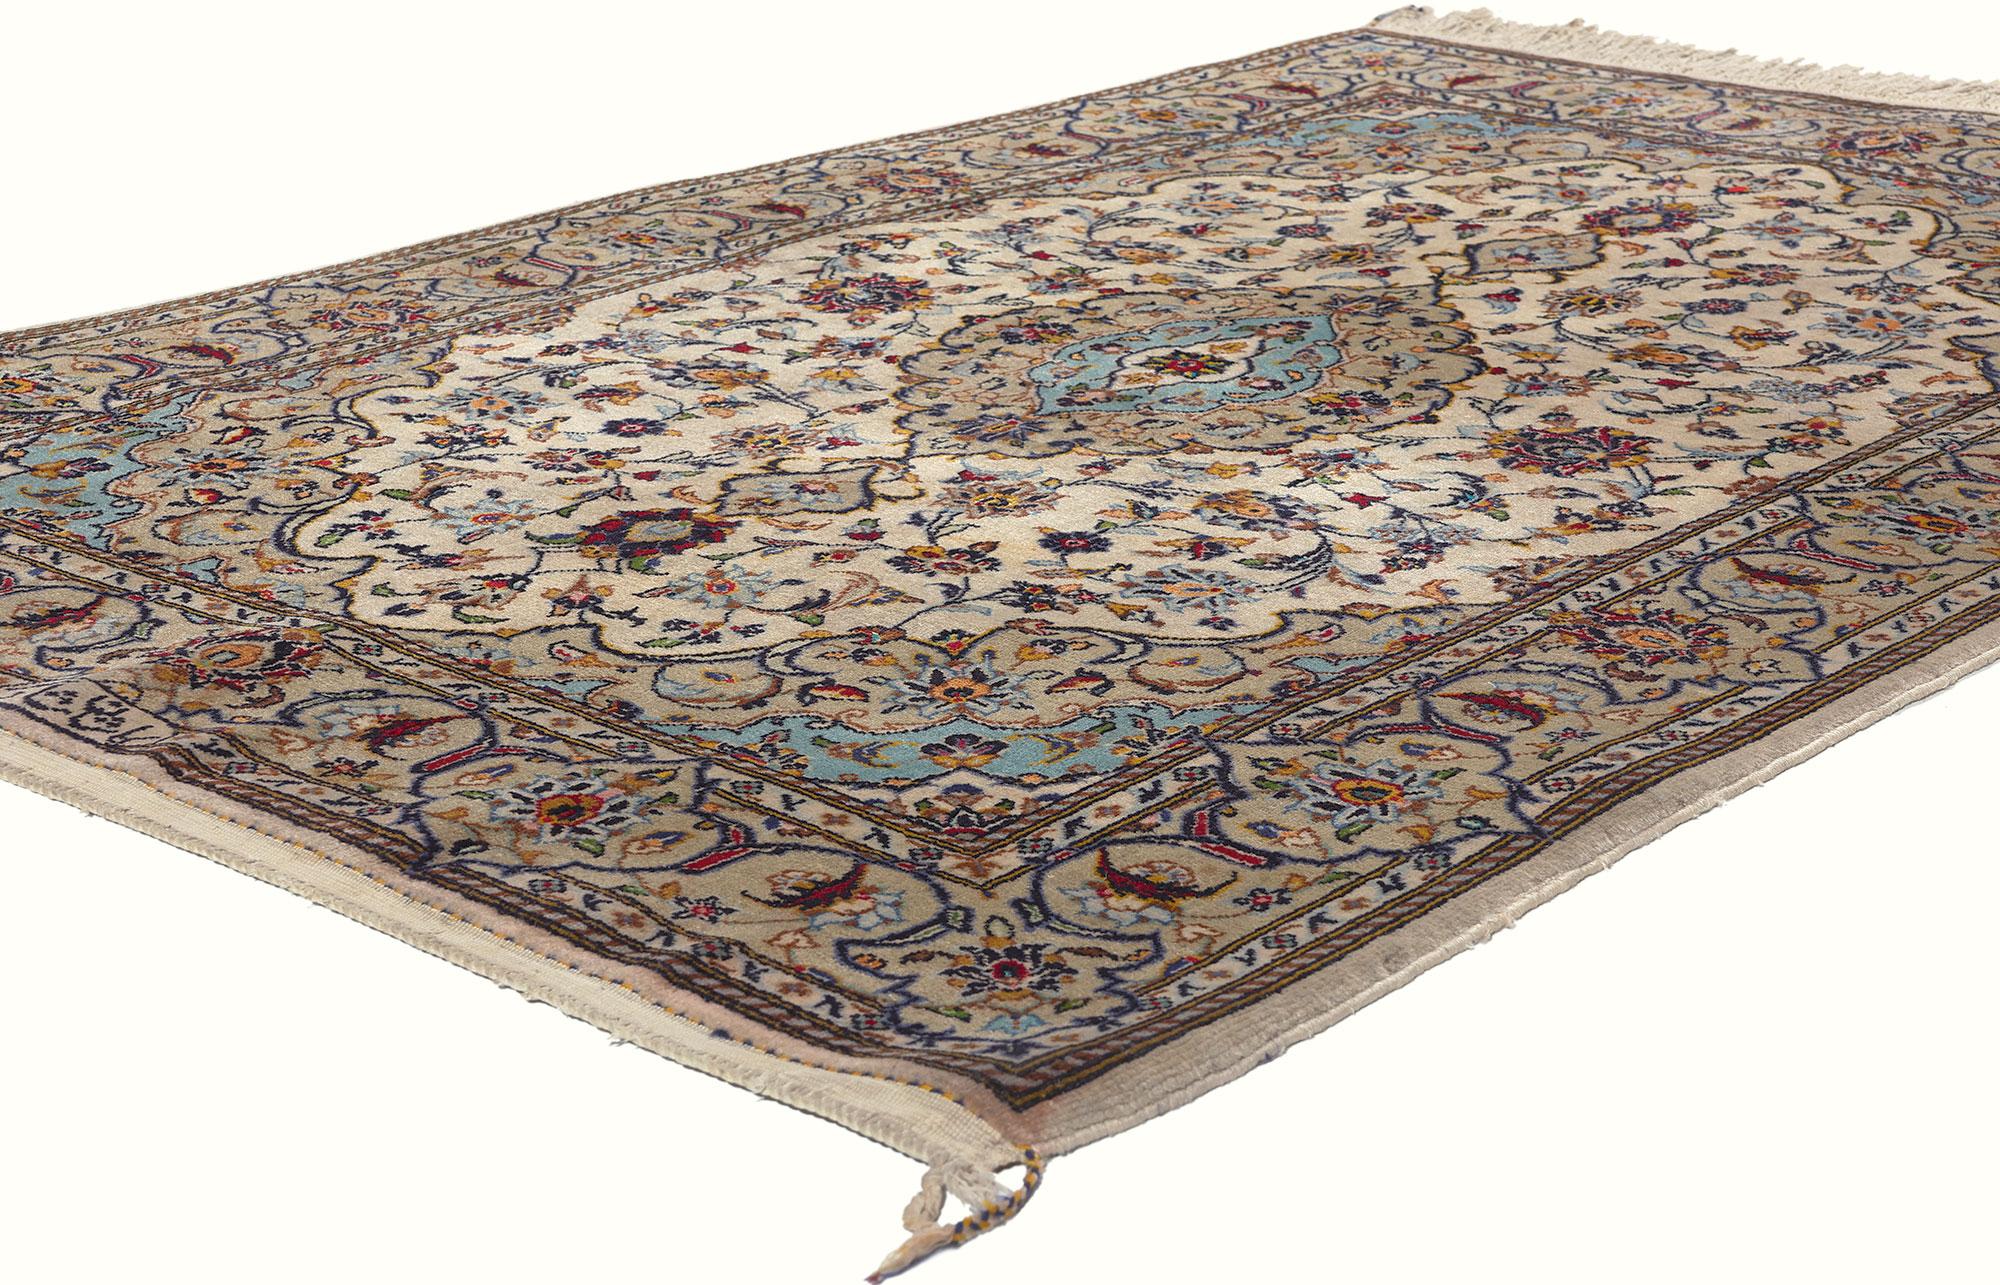 78701 Vintage Persian Shadsar Kashan Rug, 03'11 x 05'09. Persian Shadsar Kashan rugs, originating from Iran's Kashan region, epitomize meticulous hand-knotted craftsmanship, renowned for their intricate designs and superior quality. These rugs,